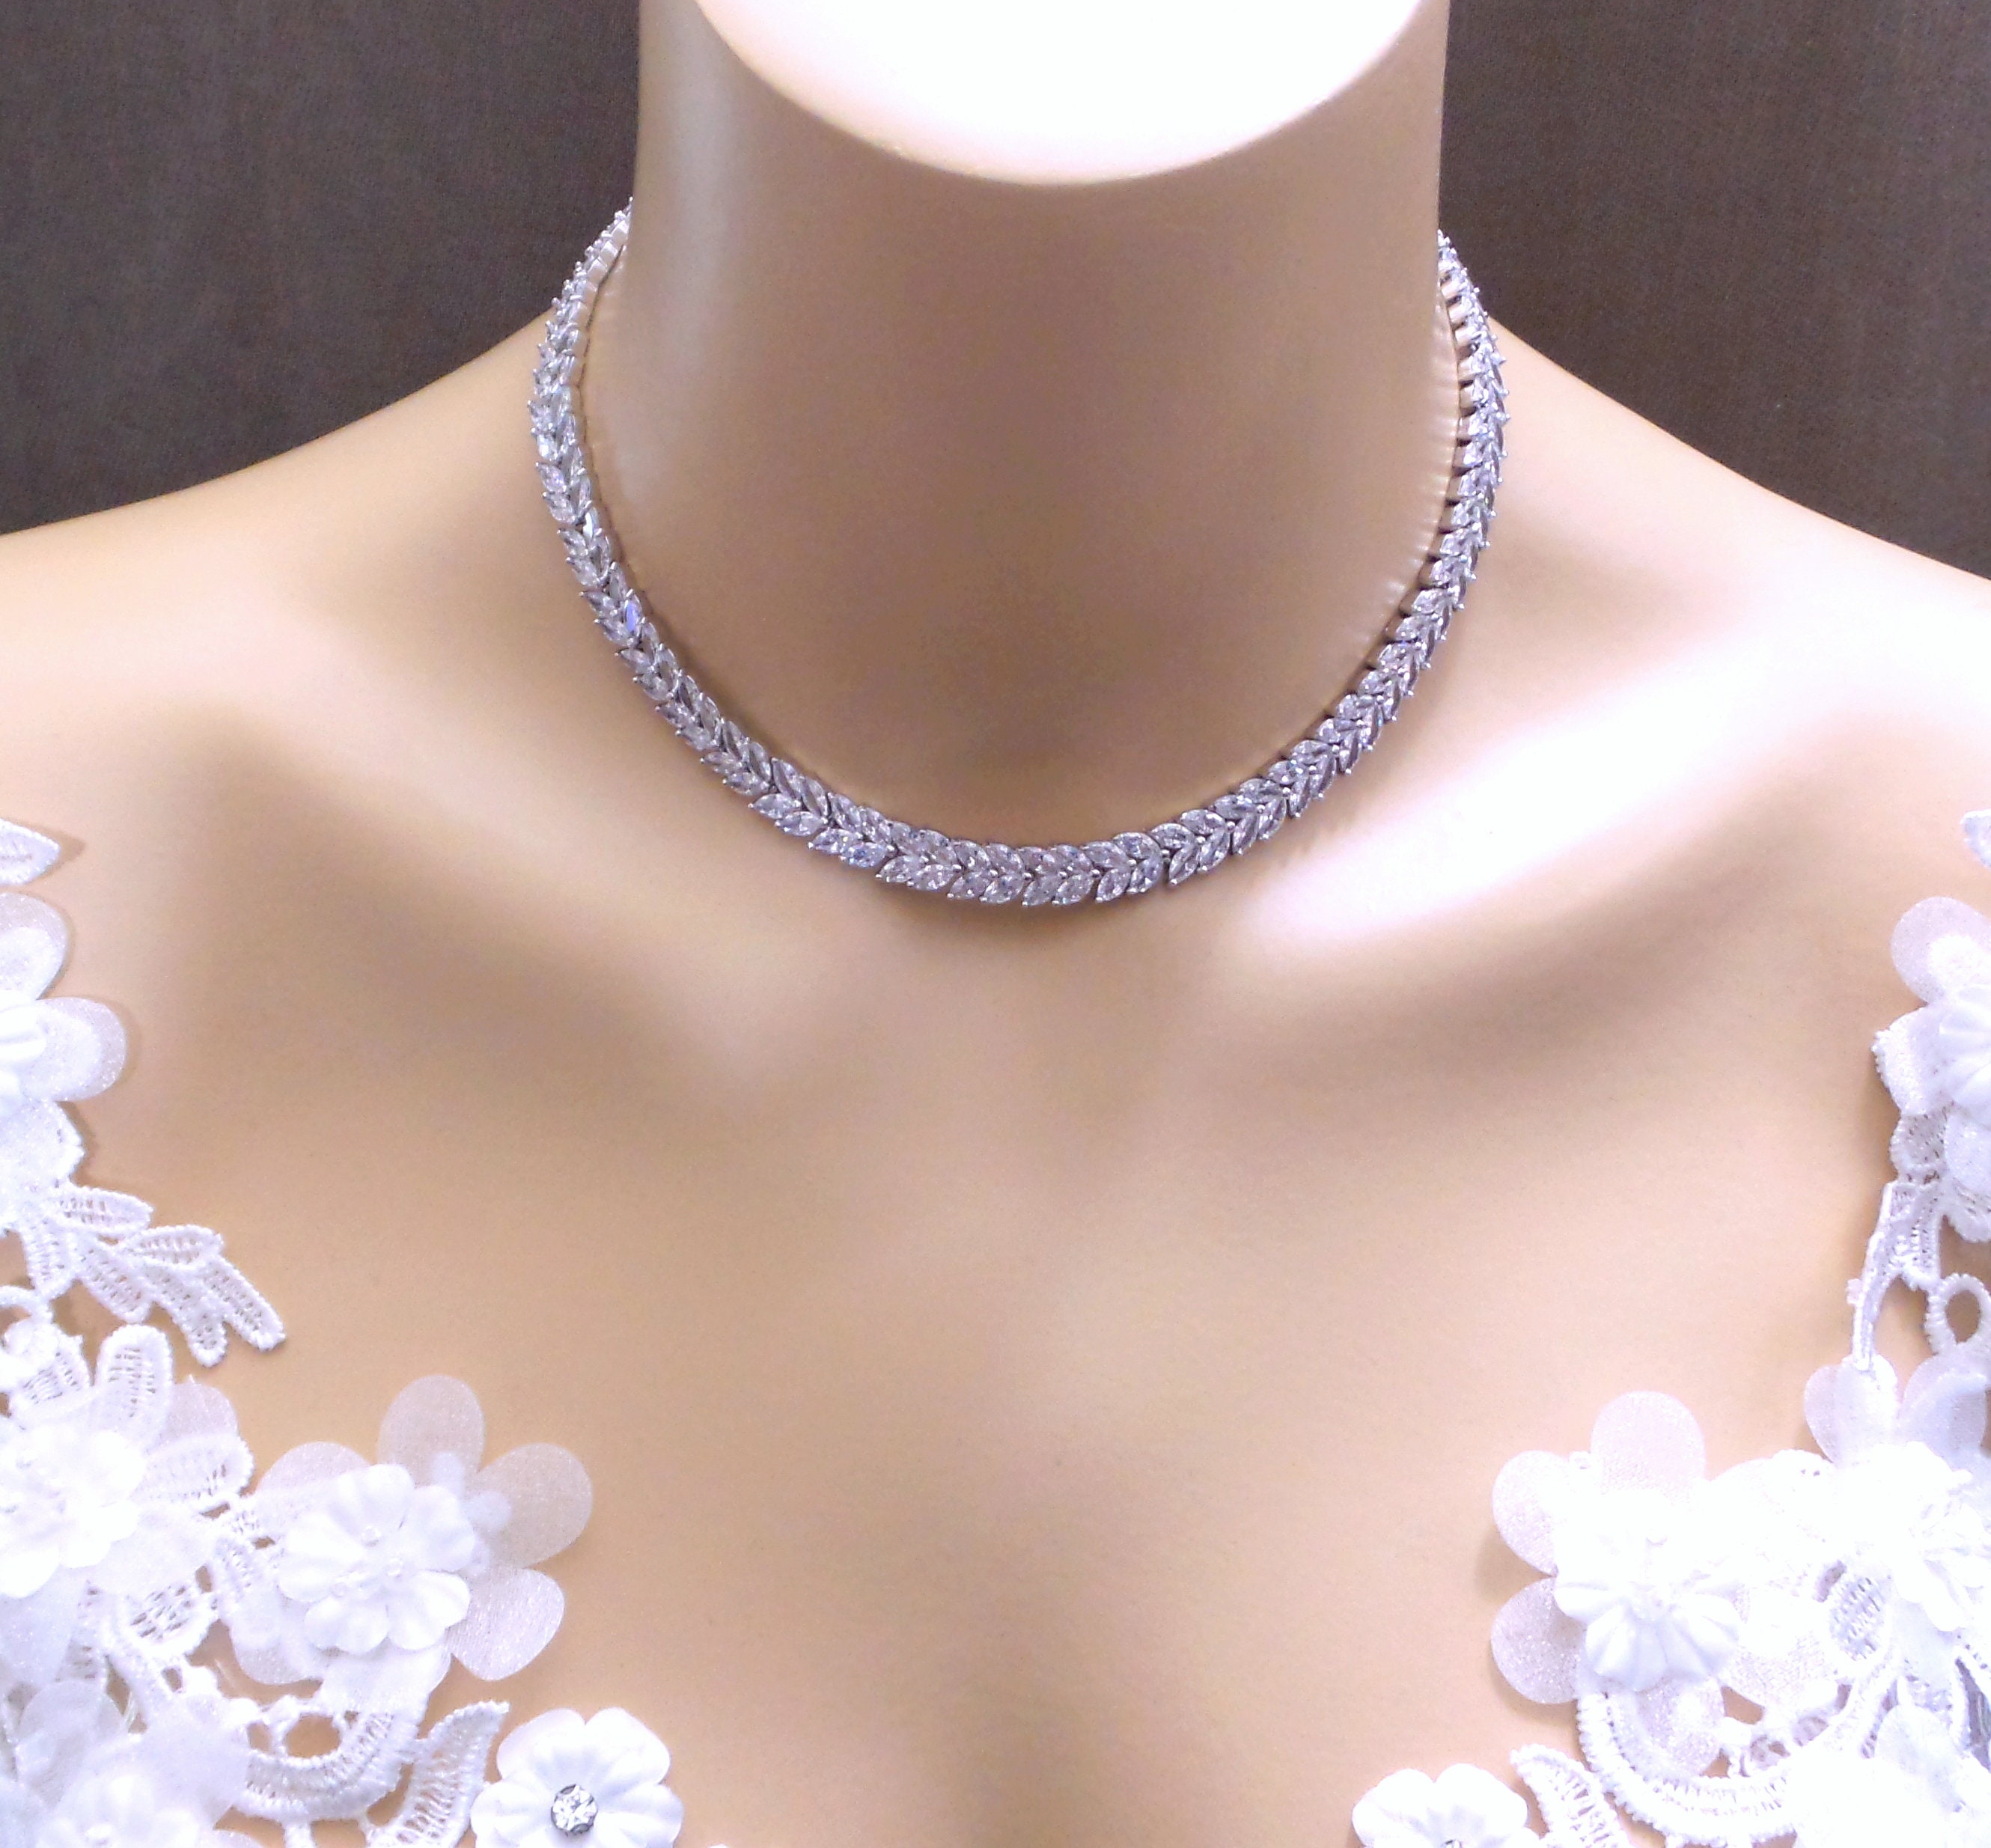 Bridal Wedding Jewelry Necklace Prom Party AAA Clear White Cubic Zirconia  Luxury White Gold Rhodium Marquise Collar Choker Tennis Necklace 